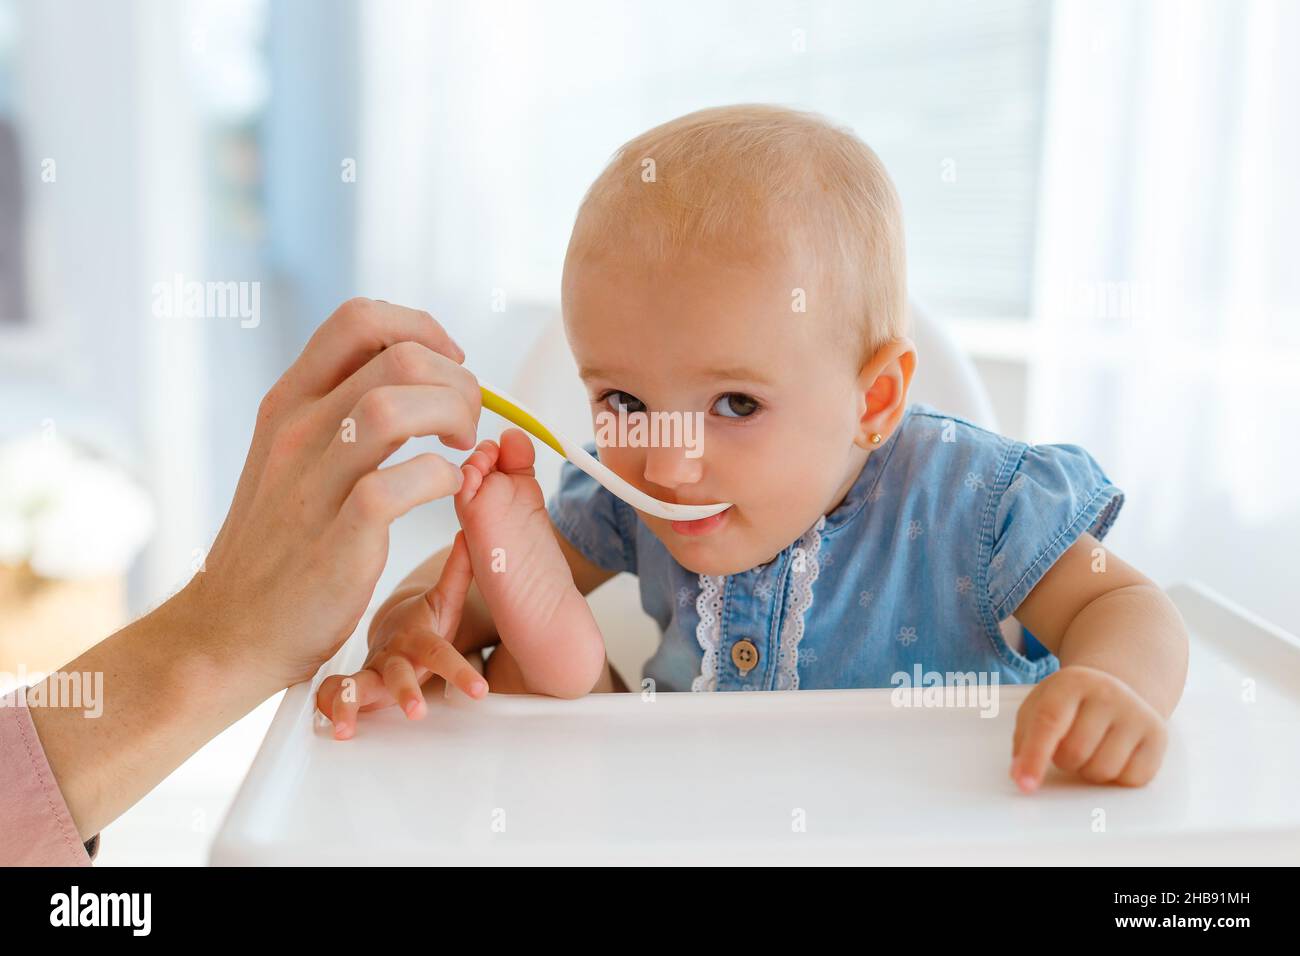 Very cute and funny baby with the spoon in hands eating kids nutrition - fruit puree. Smiling little girl eating in fun pose on white feeding table. C Stock Photo